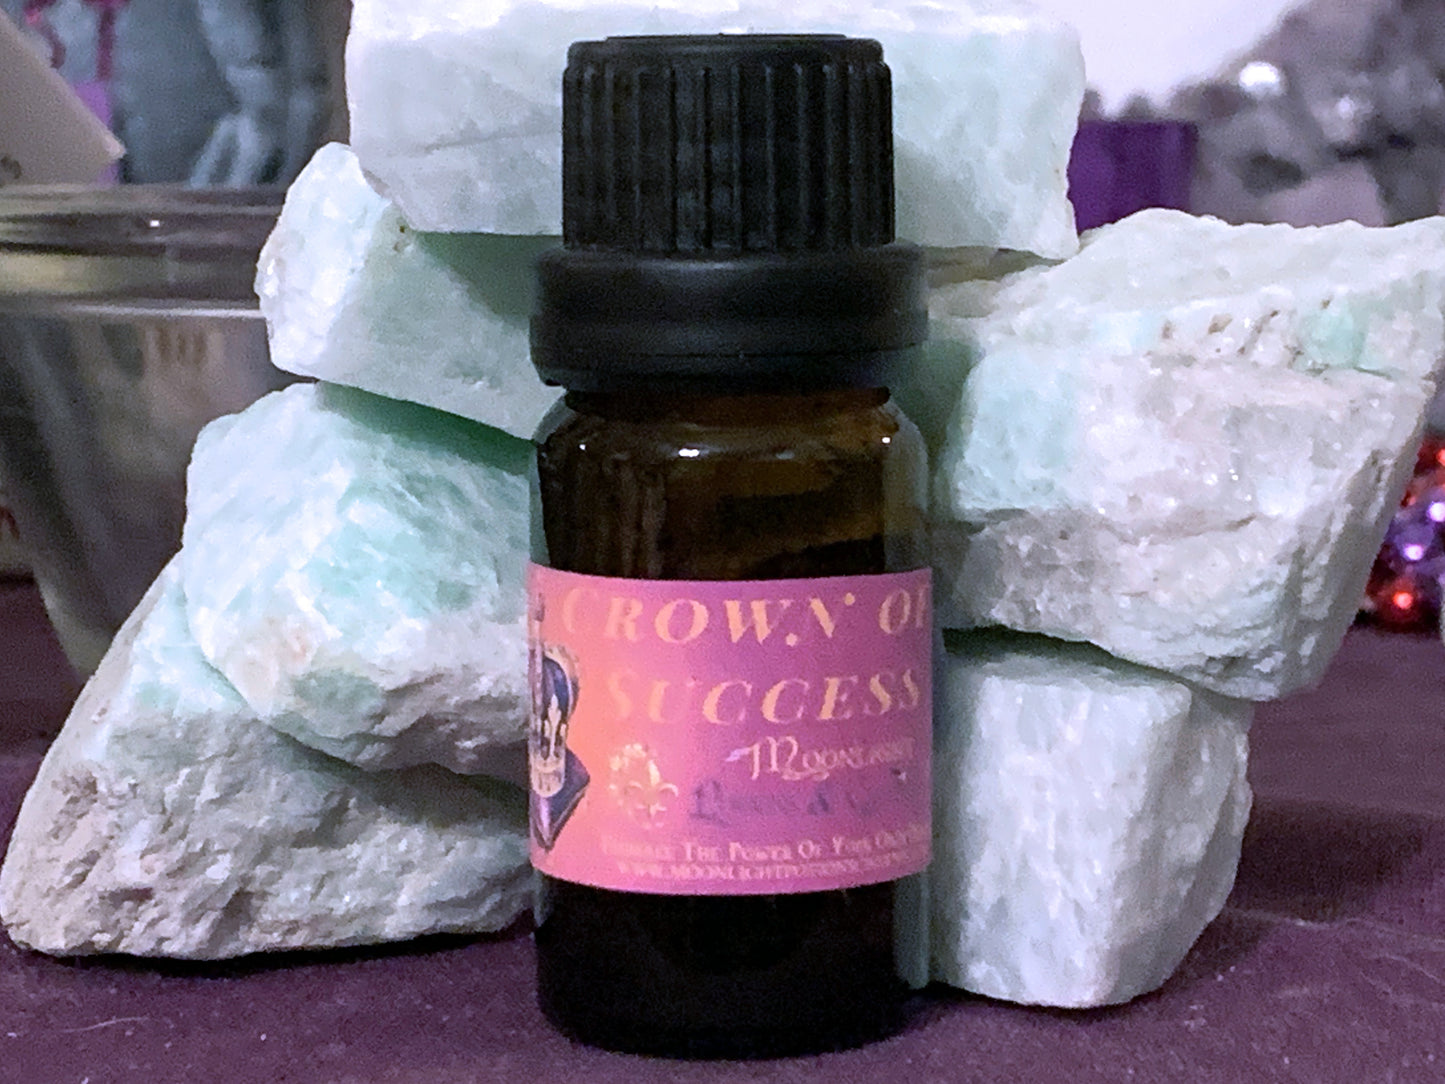 Crown of Success - Moonlight Potions & Charms